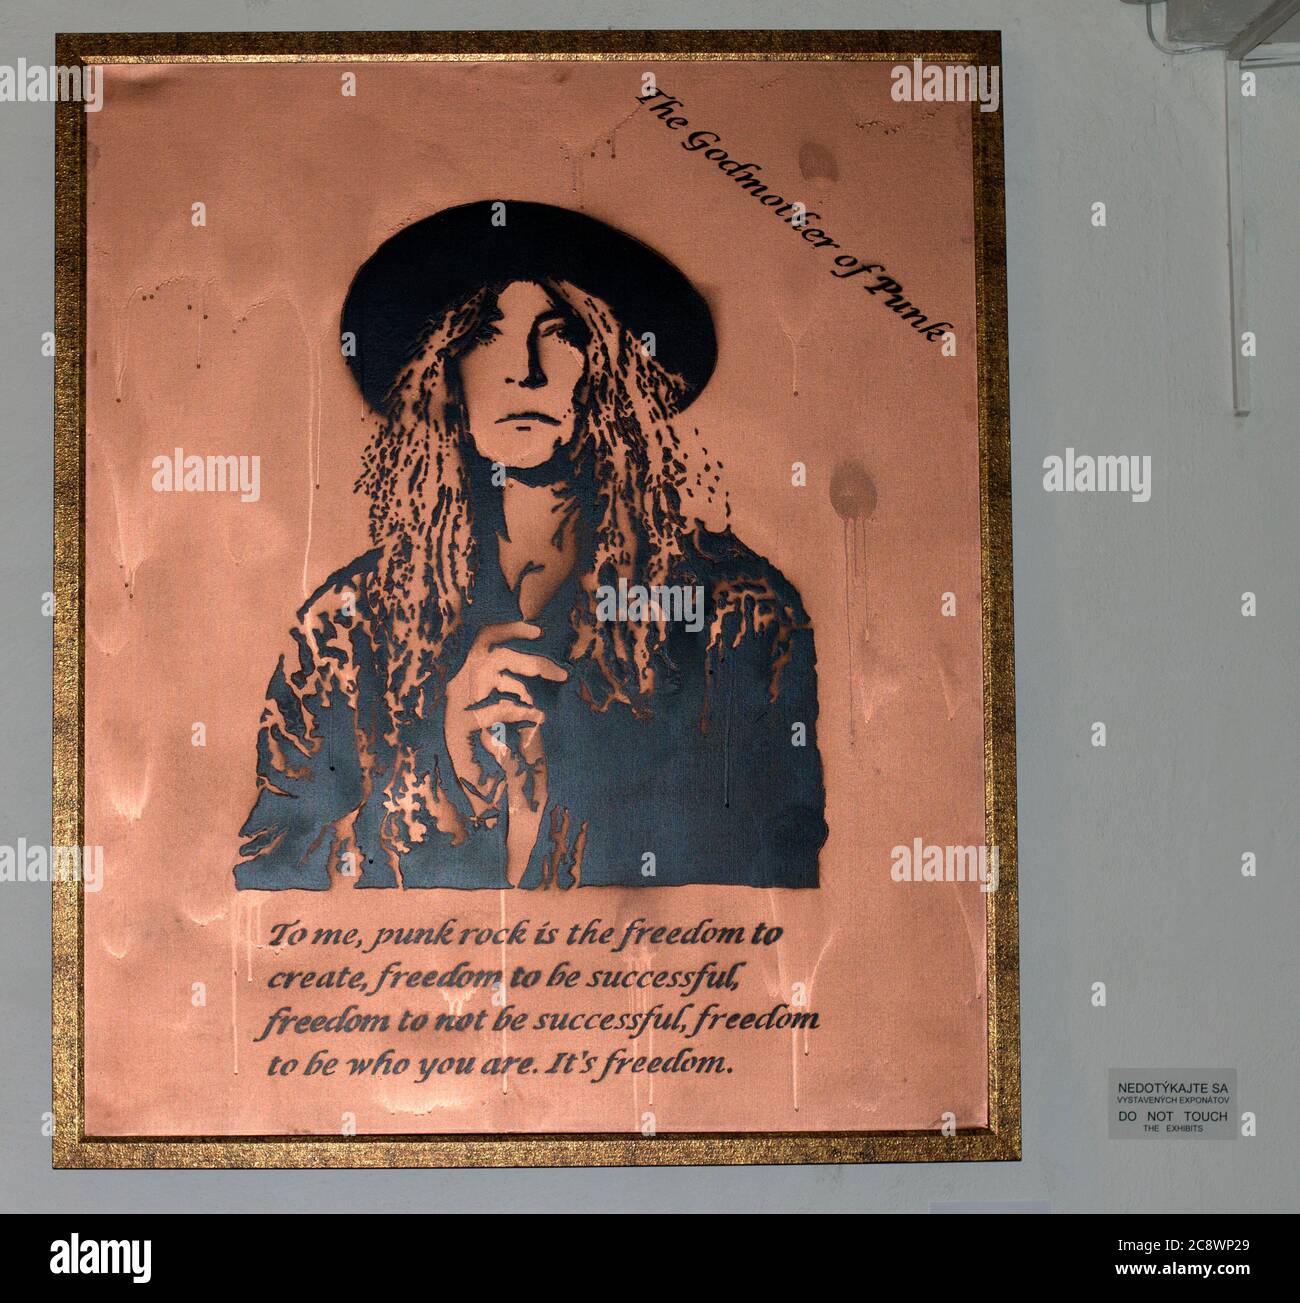 Medzilaborce Slovakia June 04, 2020 Patti Smith, Iggy Pop portrait is on exhibition in the Andy Warhol Museum of Modern Art. Spray Paint on Canvas. Stock Photo